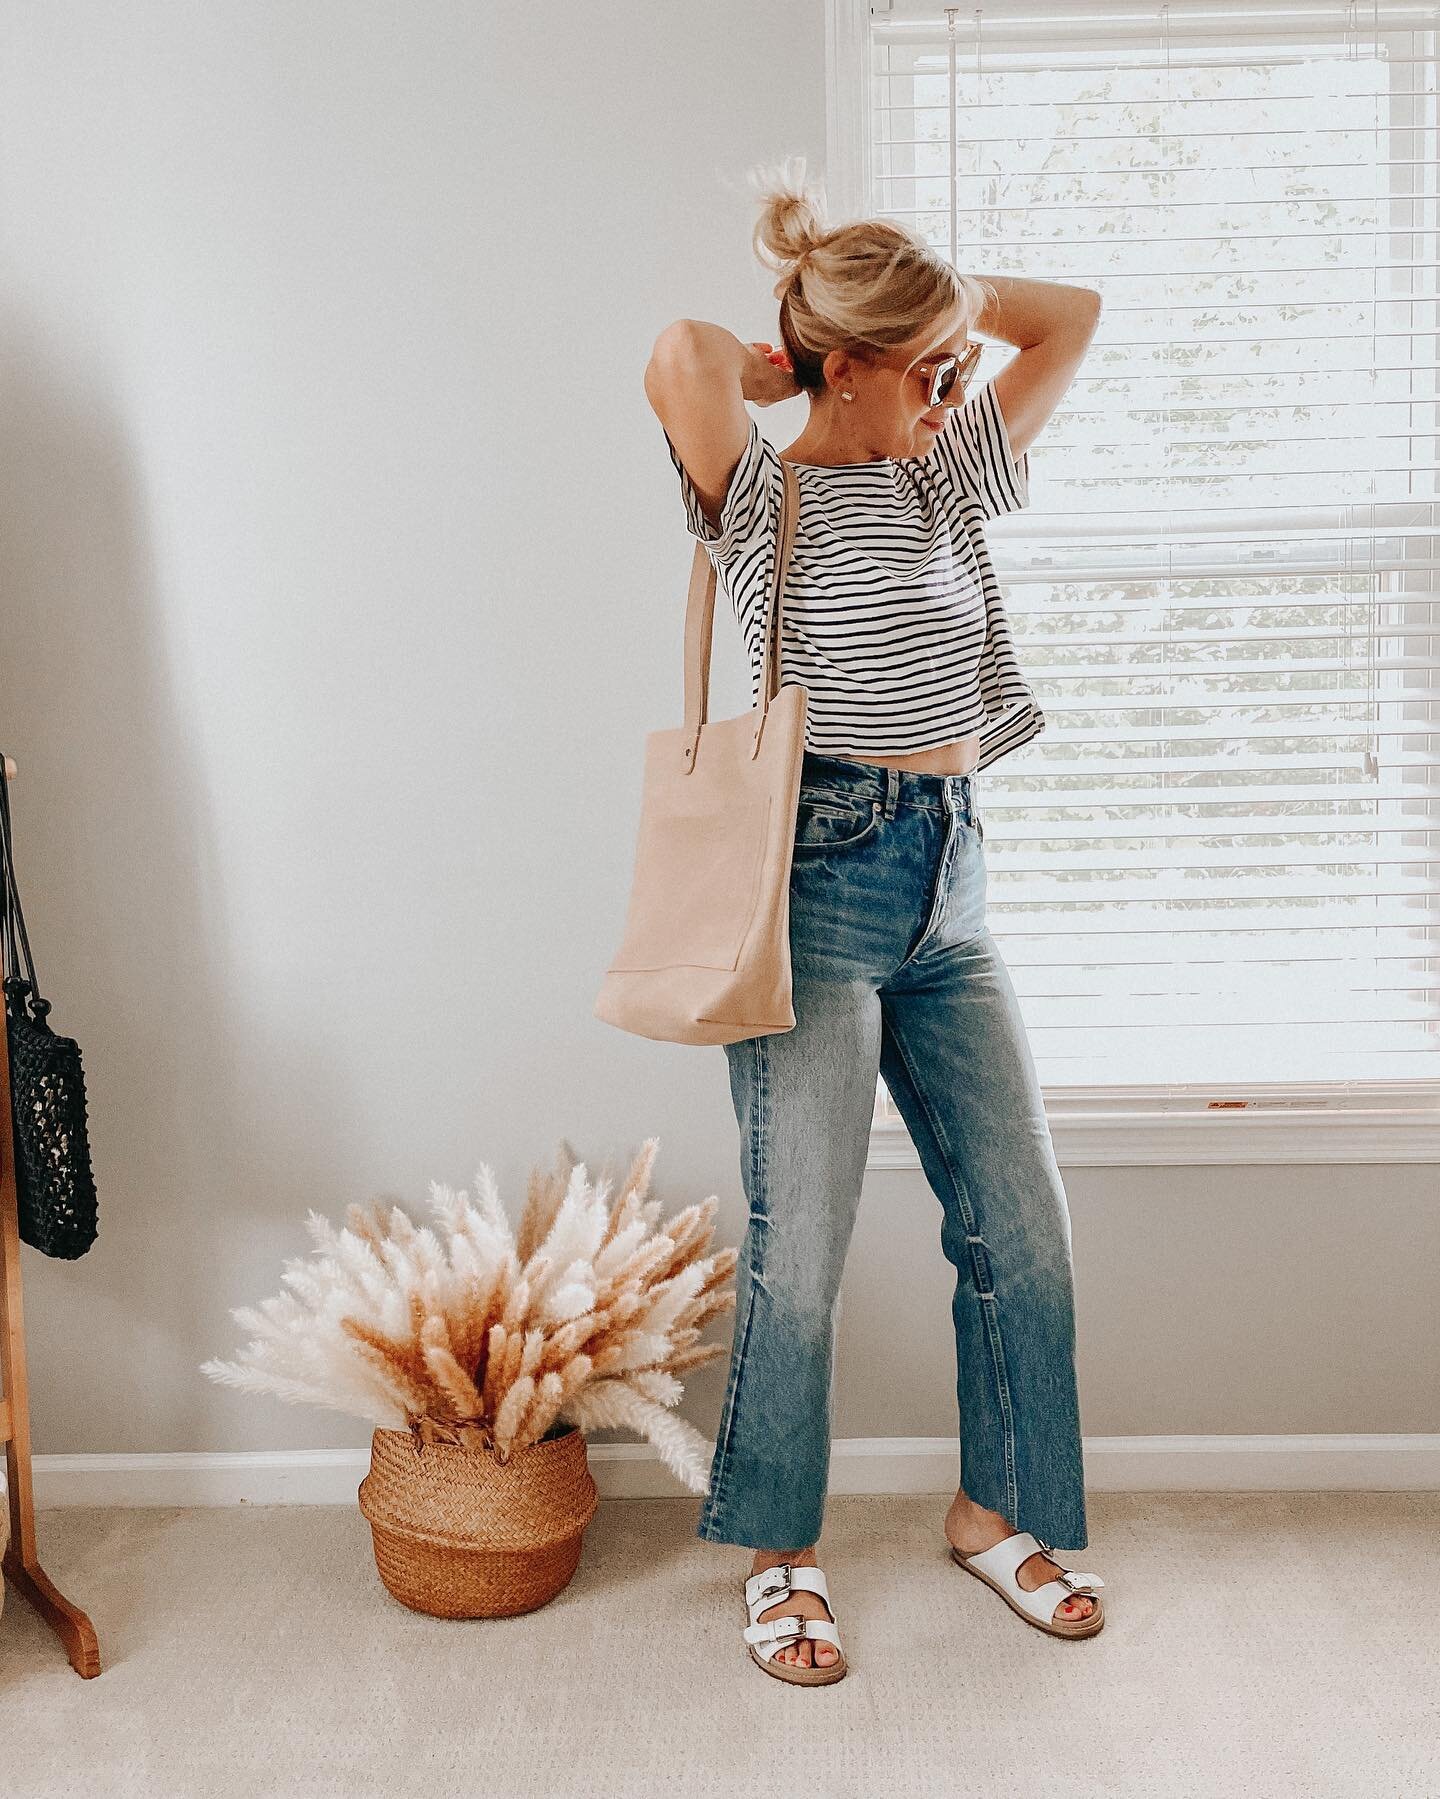 Outfit choice for running errands today.

Top + sandals @able (code melanie15) 

Bag @parkerclay Caroline tote (code pc-melanie20) 

Glasses @lespecs 

Jeans @zara , thanks to @natalieborton for inspiring me to cut the hem of these jeans to be more w